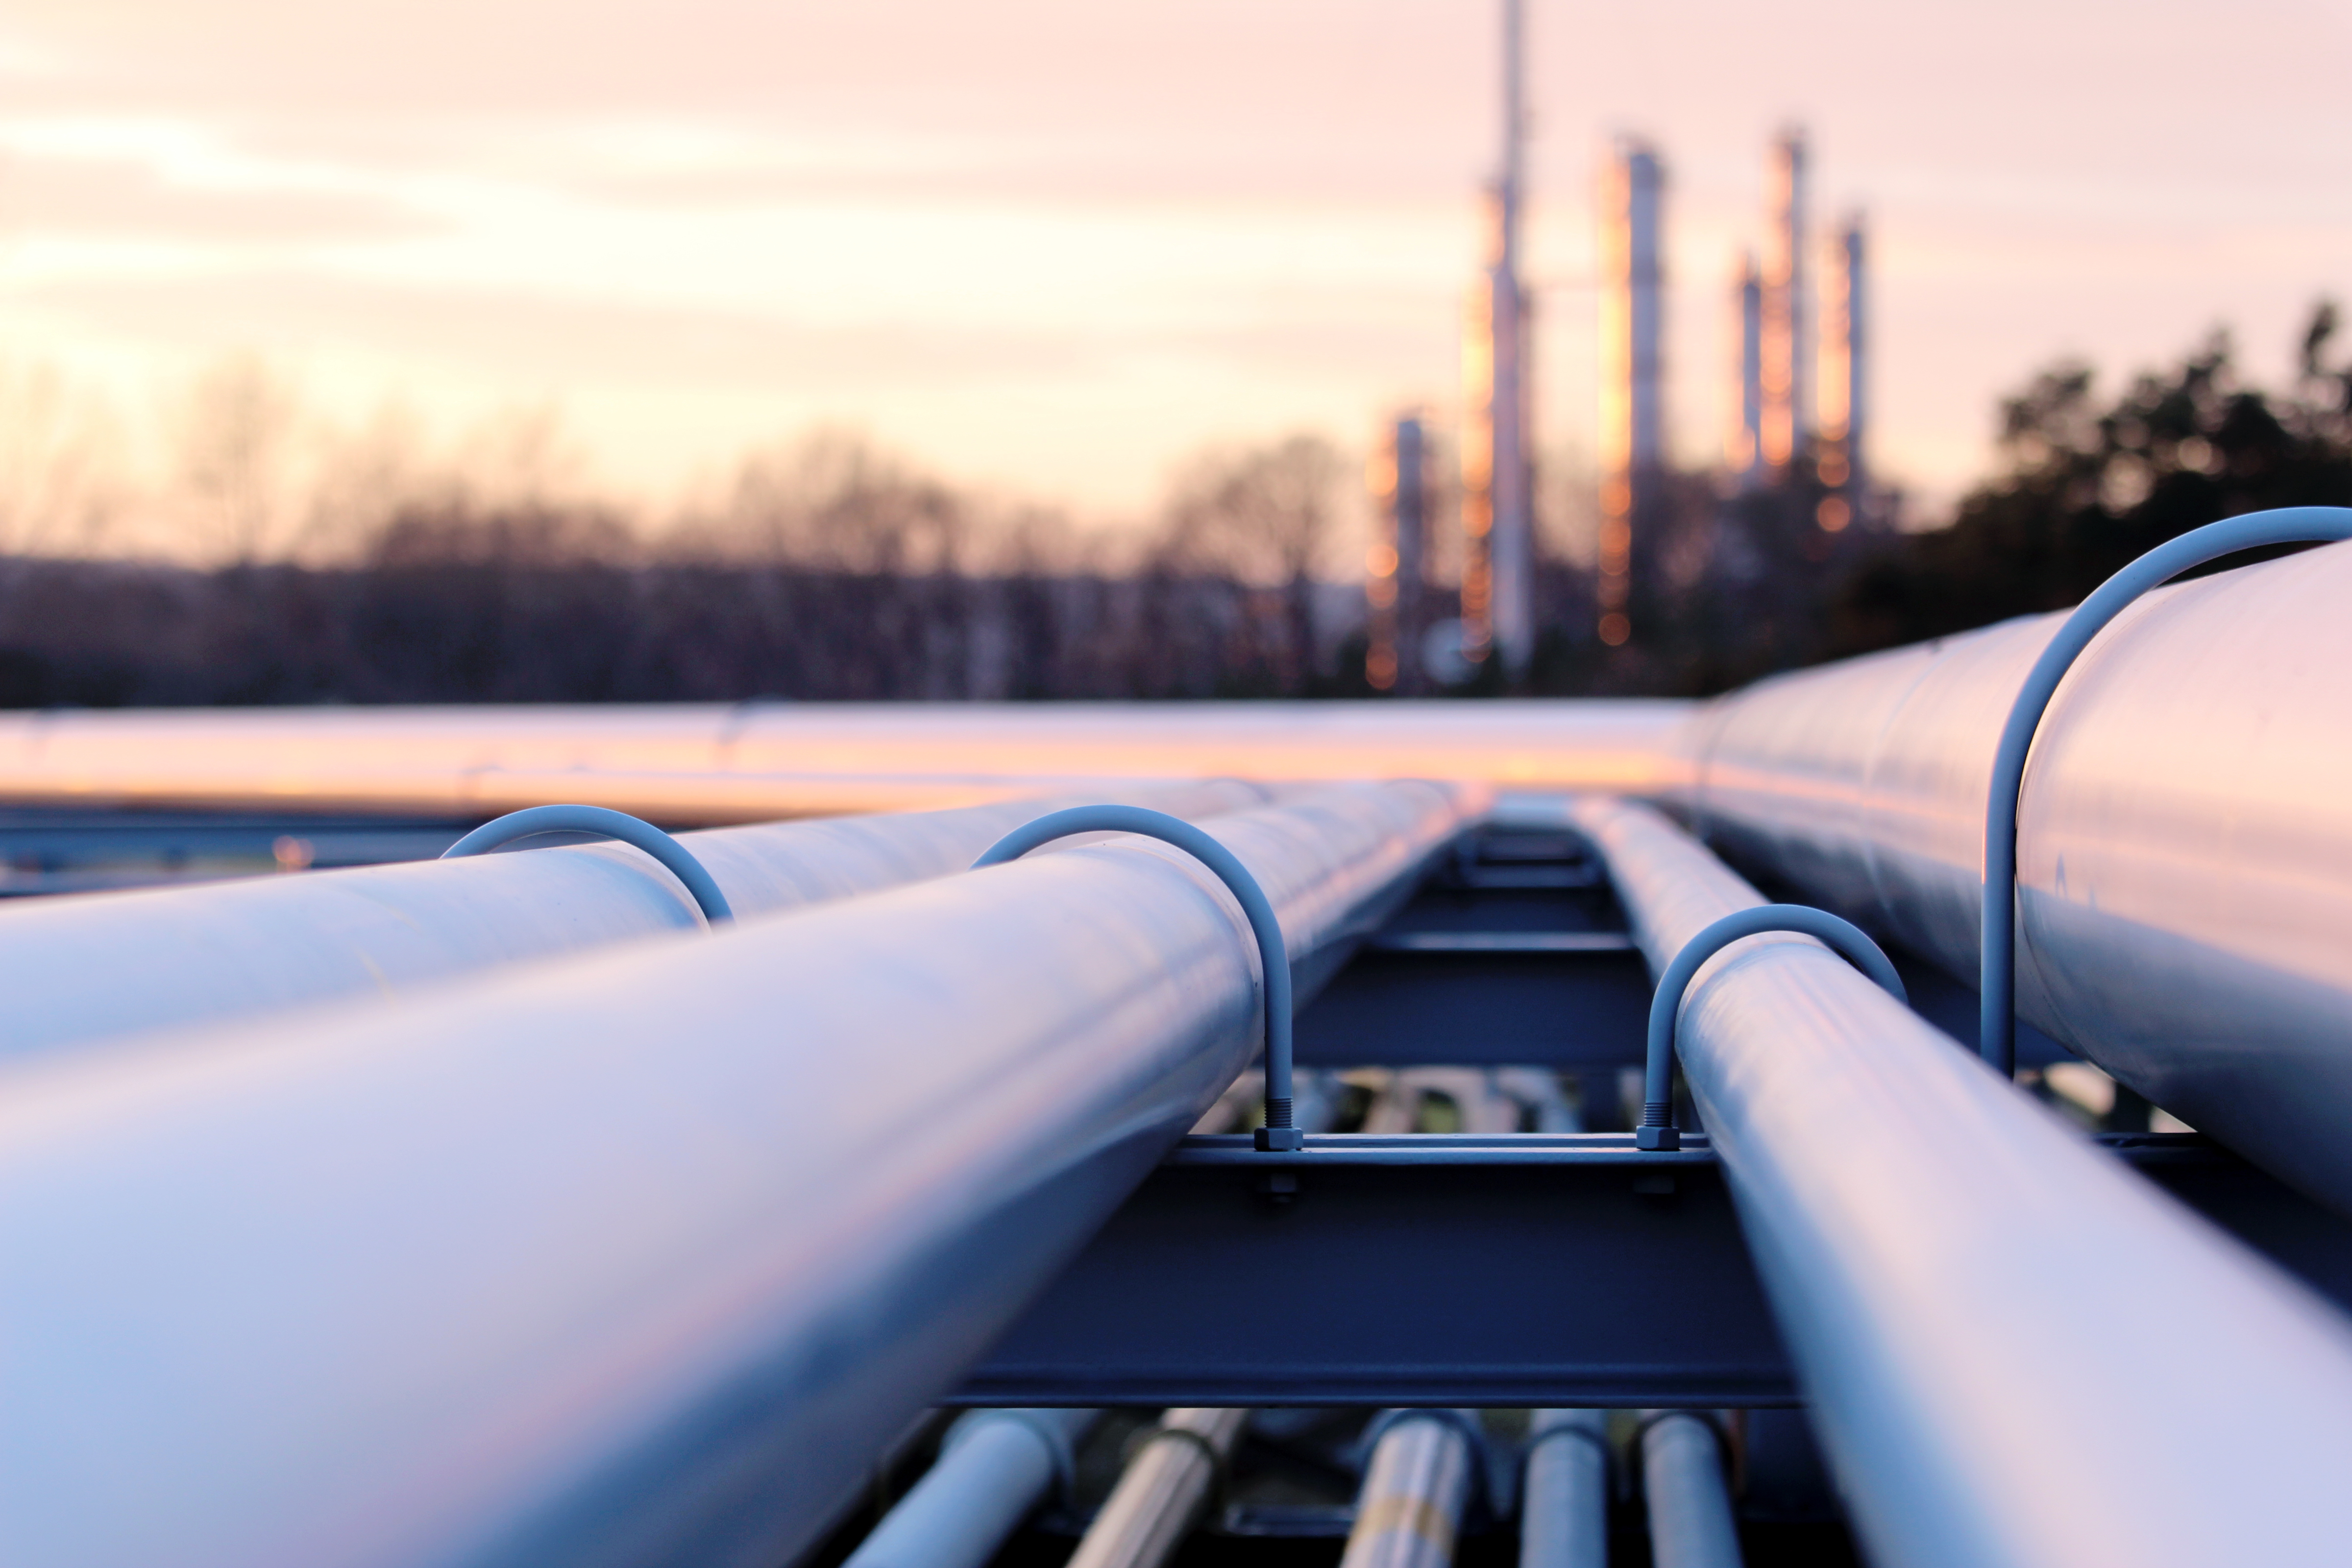 Reducing industrial fossil gas demand in Europe - What are the next steps?